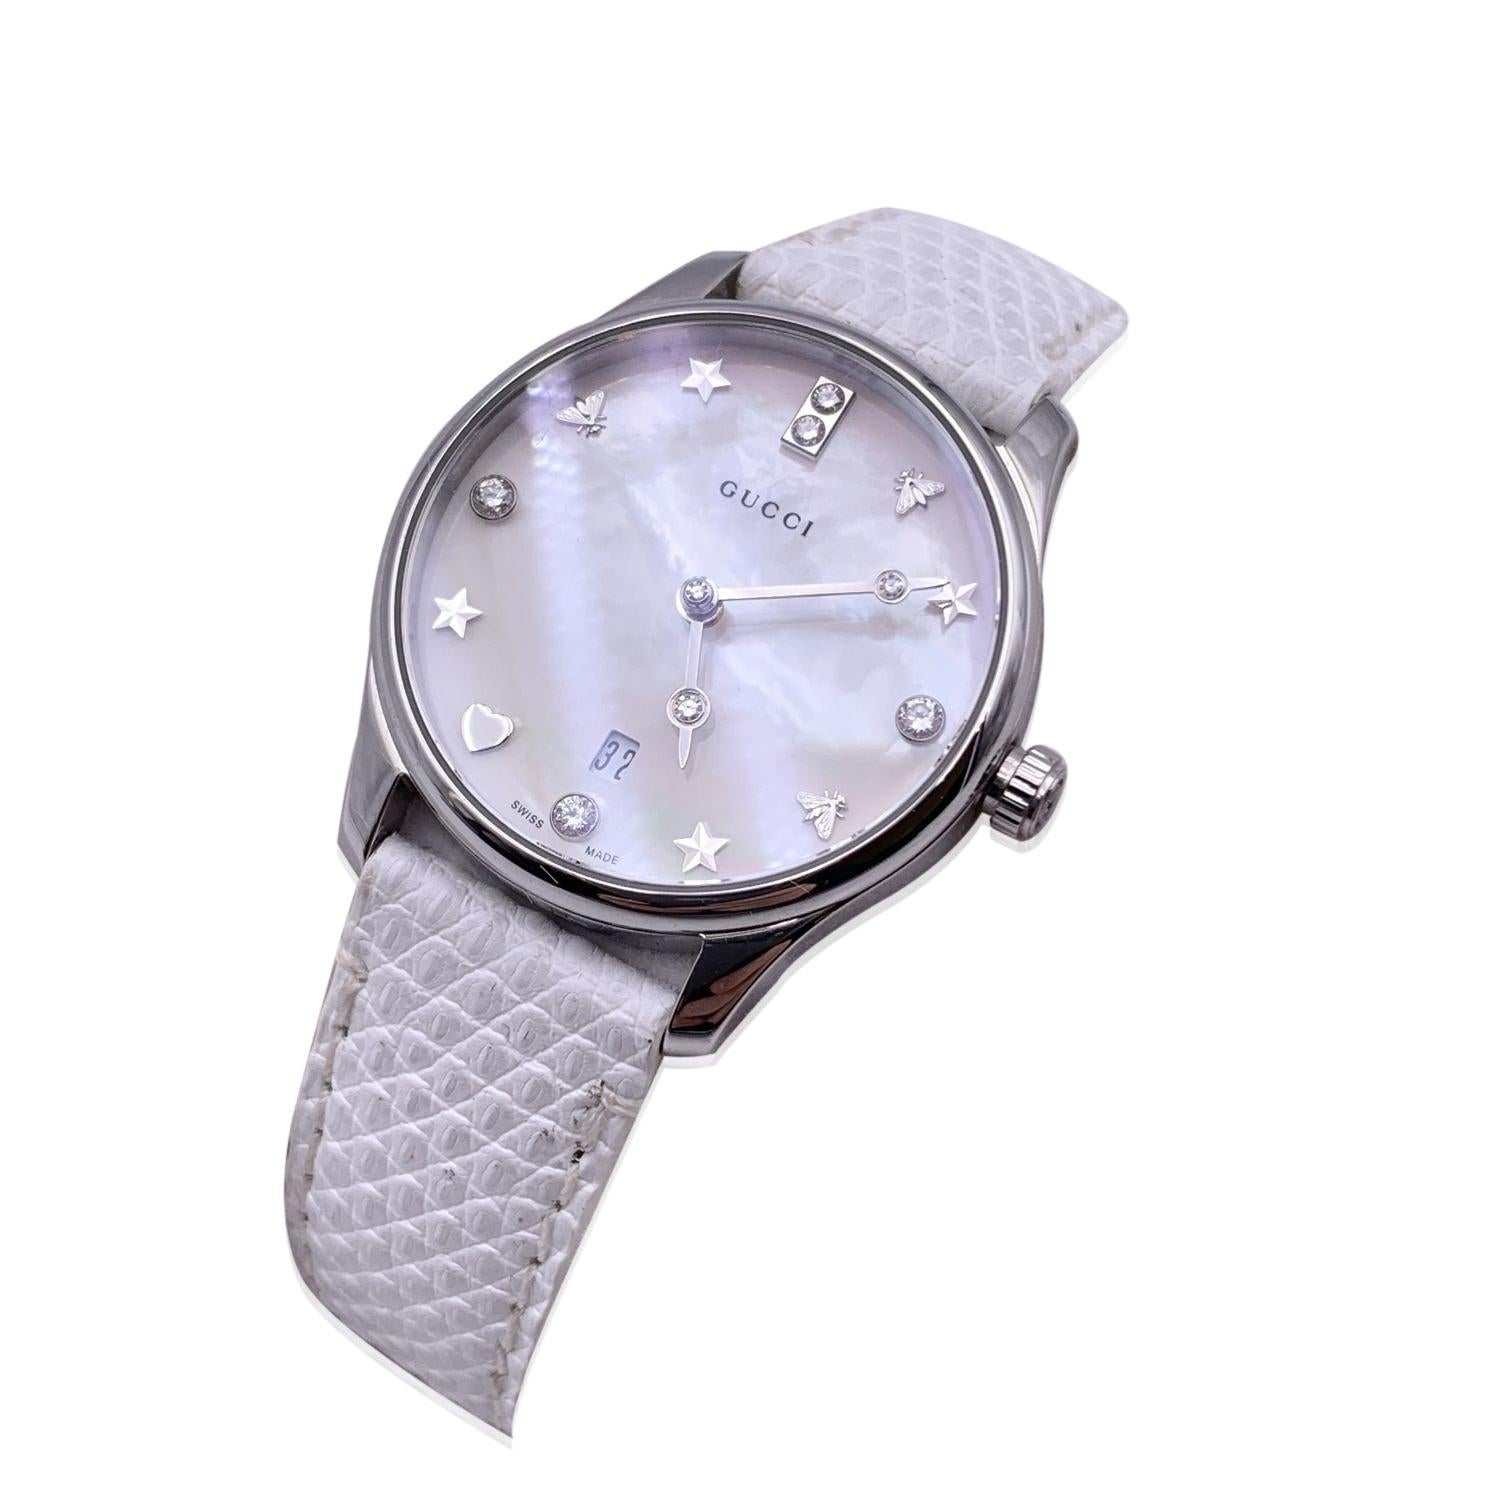 Gucci 'G-Timeless Slim' stainless steel watch. Model 126.5. Round stainless steel metal case (28 mm - crown included). White mother of pearl dial with date function. This watch feature diamonds, bees and stars motif hour markers. Two silver metal